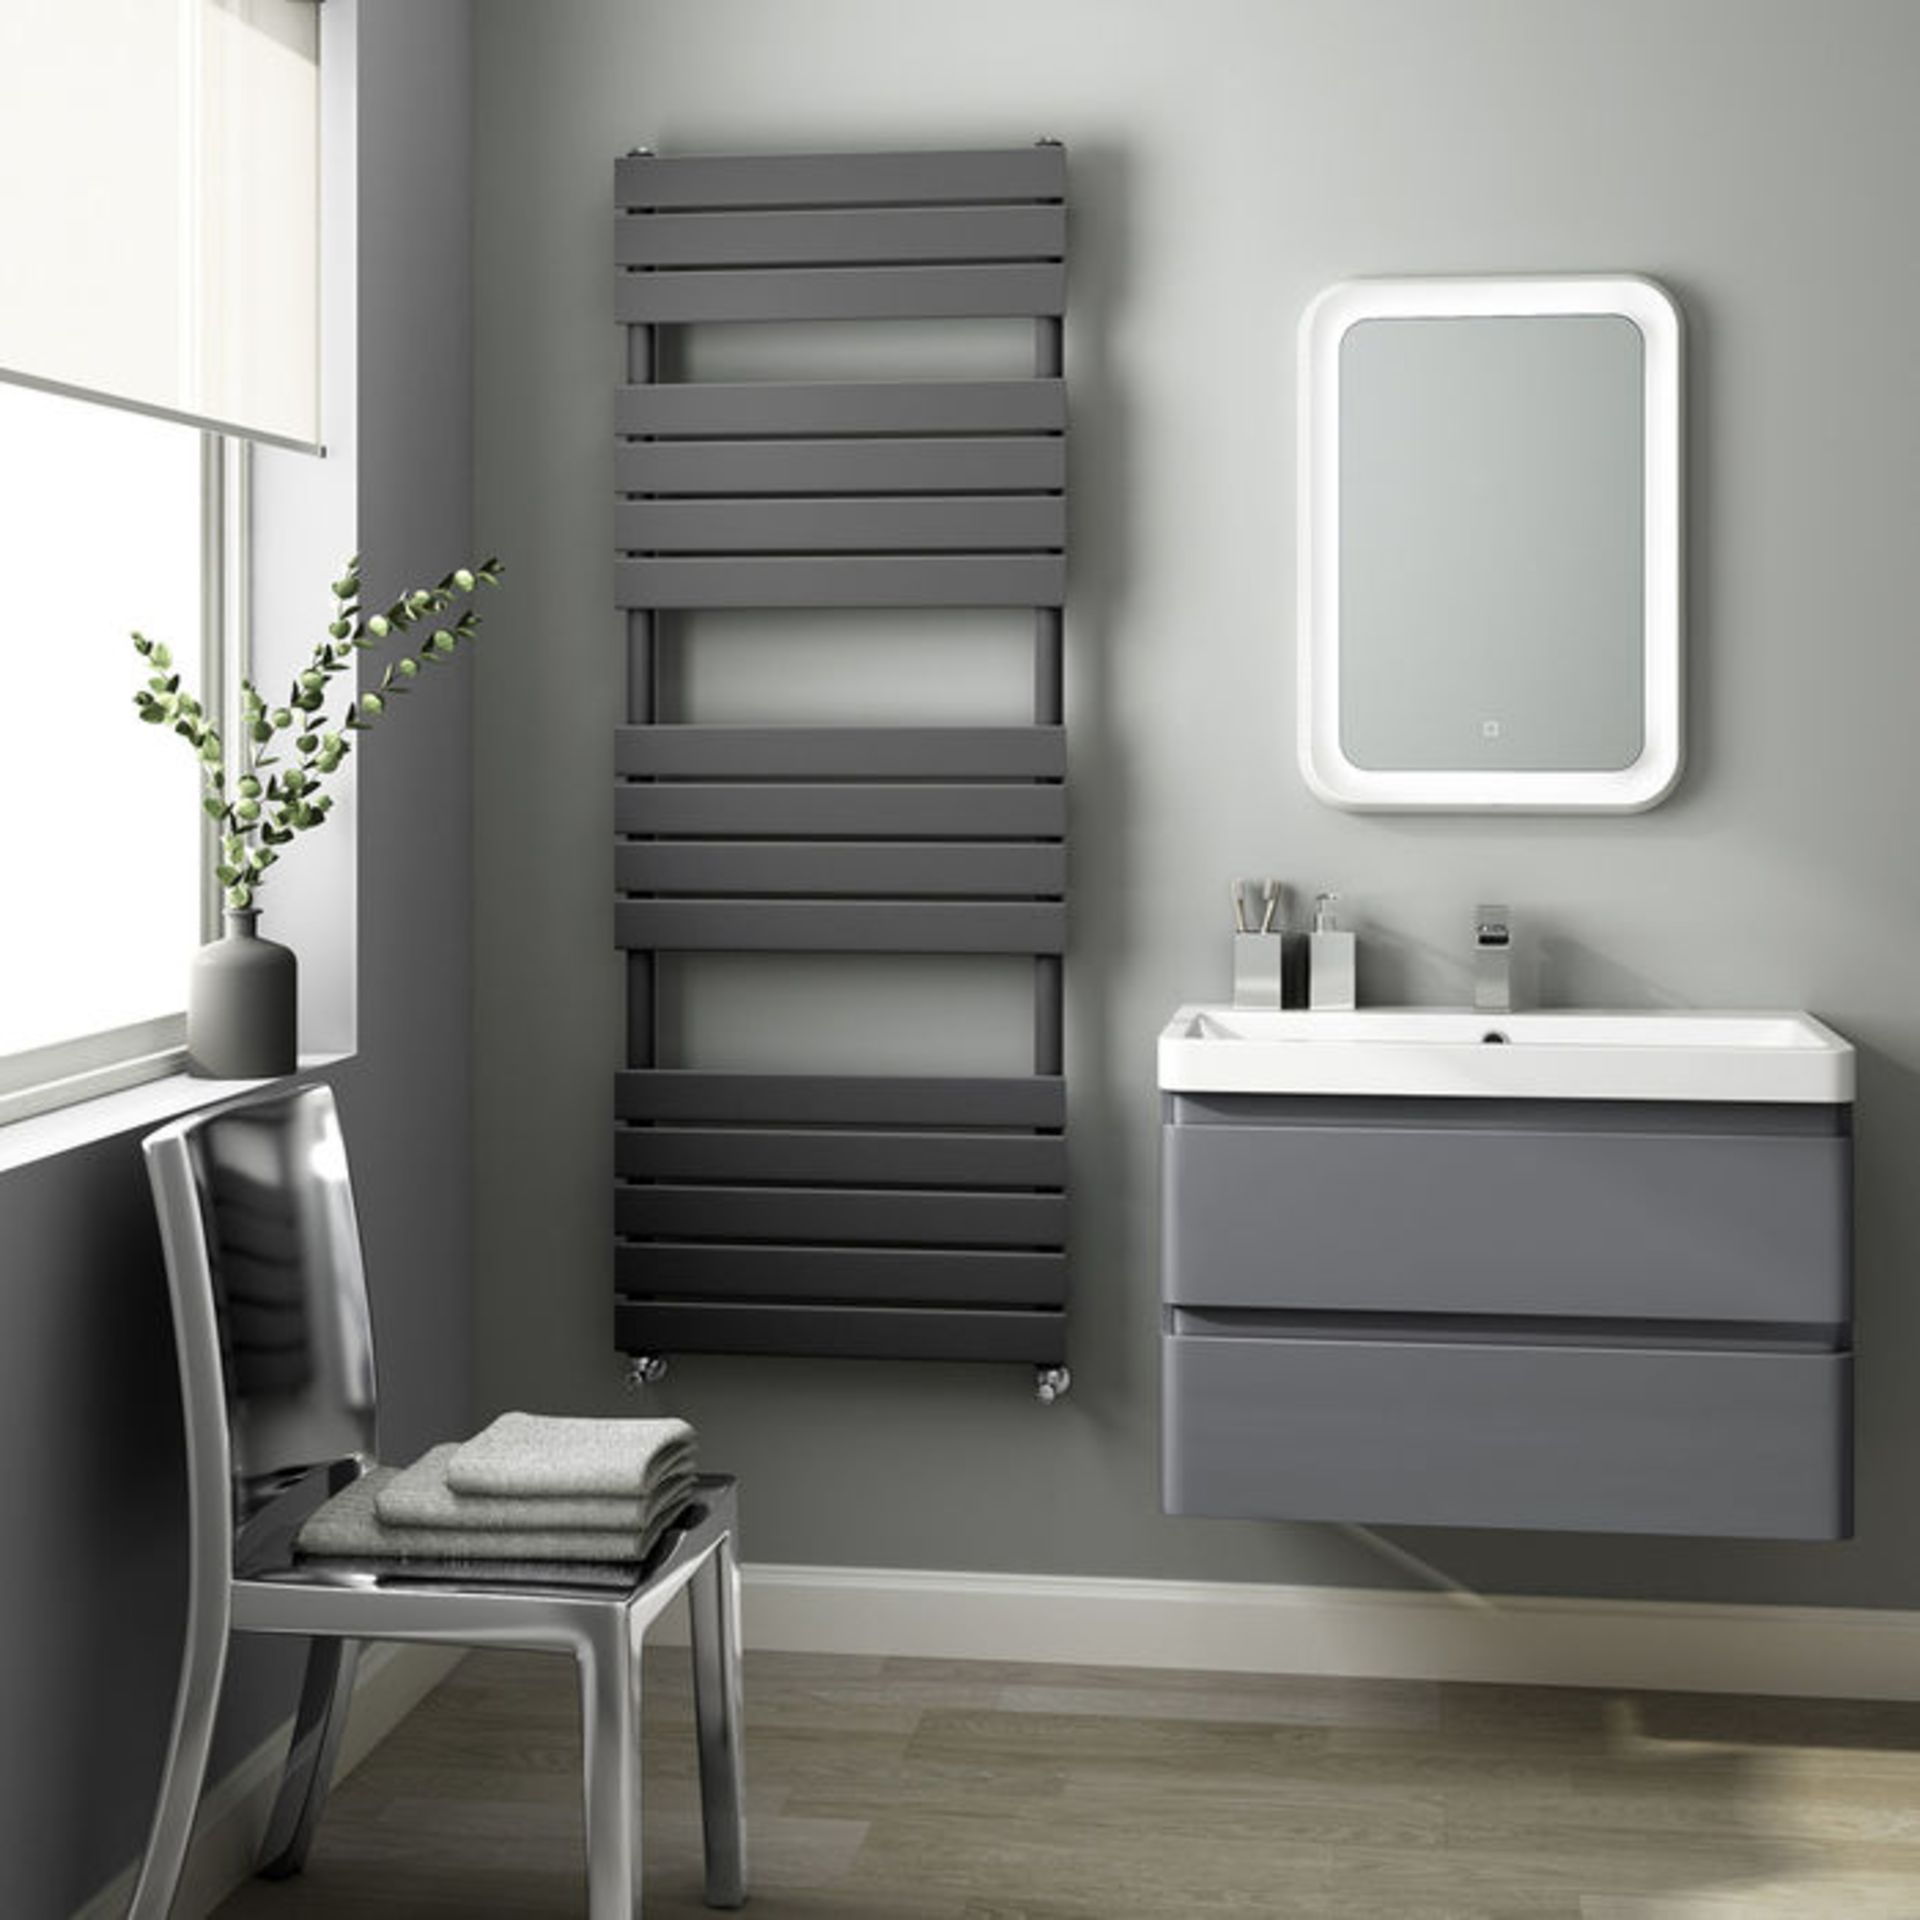 (DK125) 1600x600mm Anthracite Flat Panel Ladder Towel Radiator. RRP £399.99. Made with low carbon - Image 2 of 3